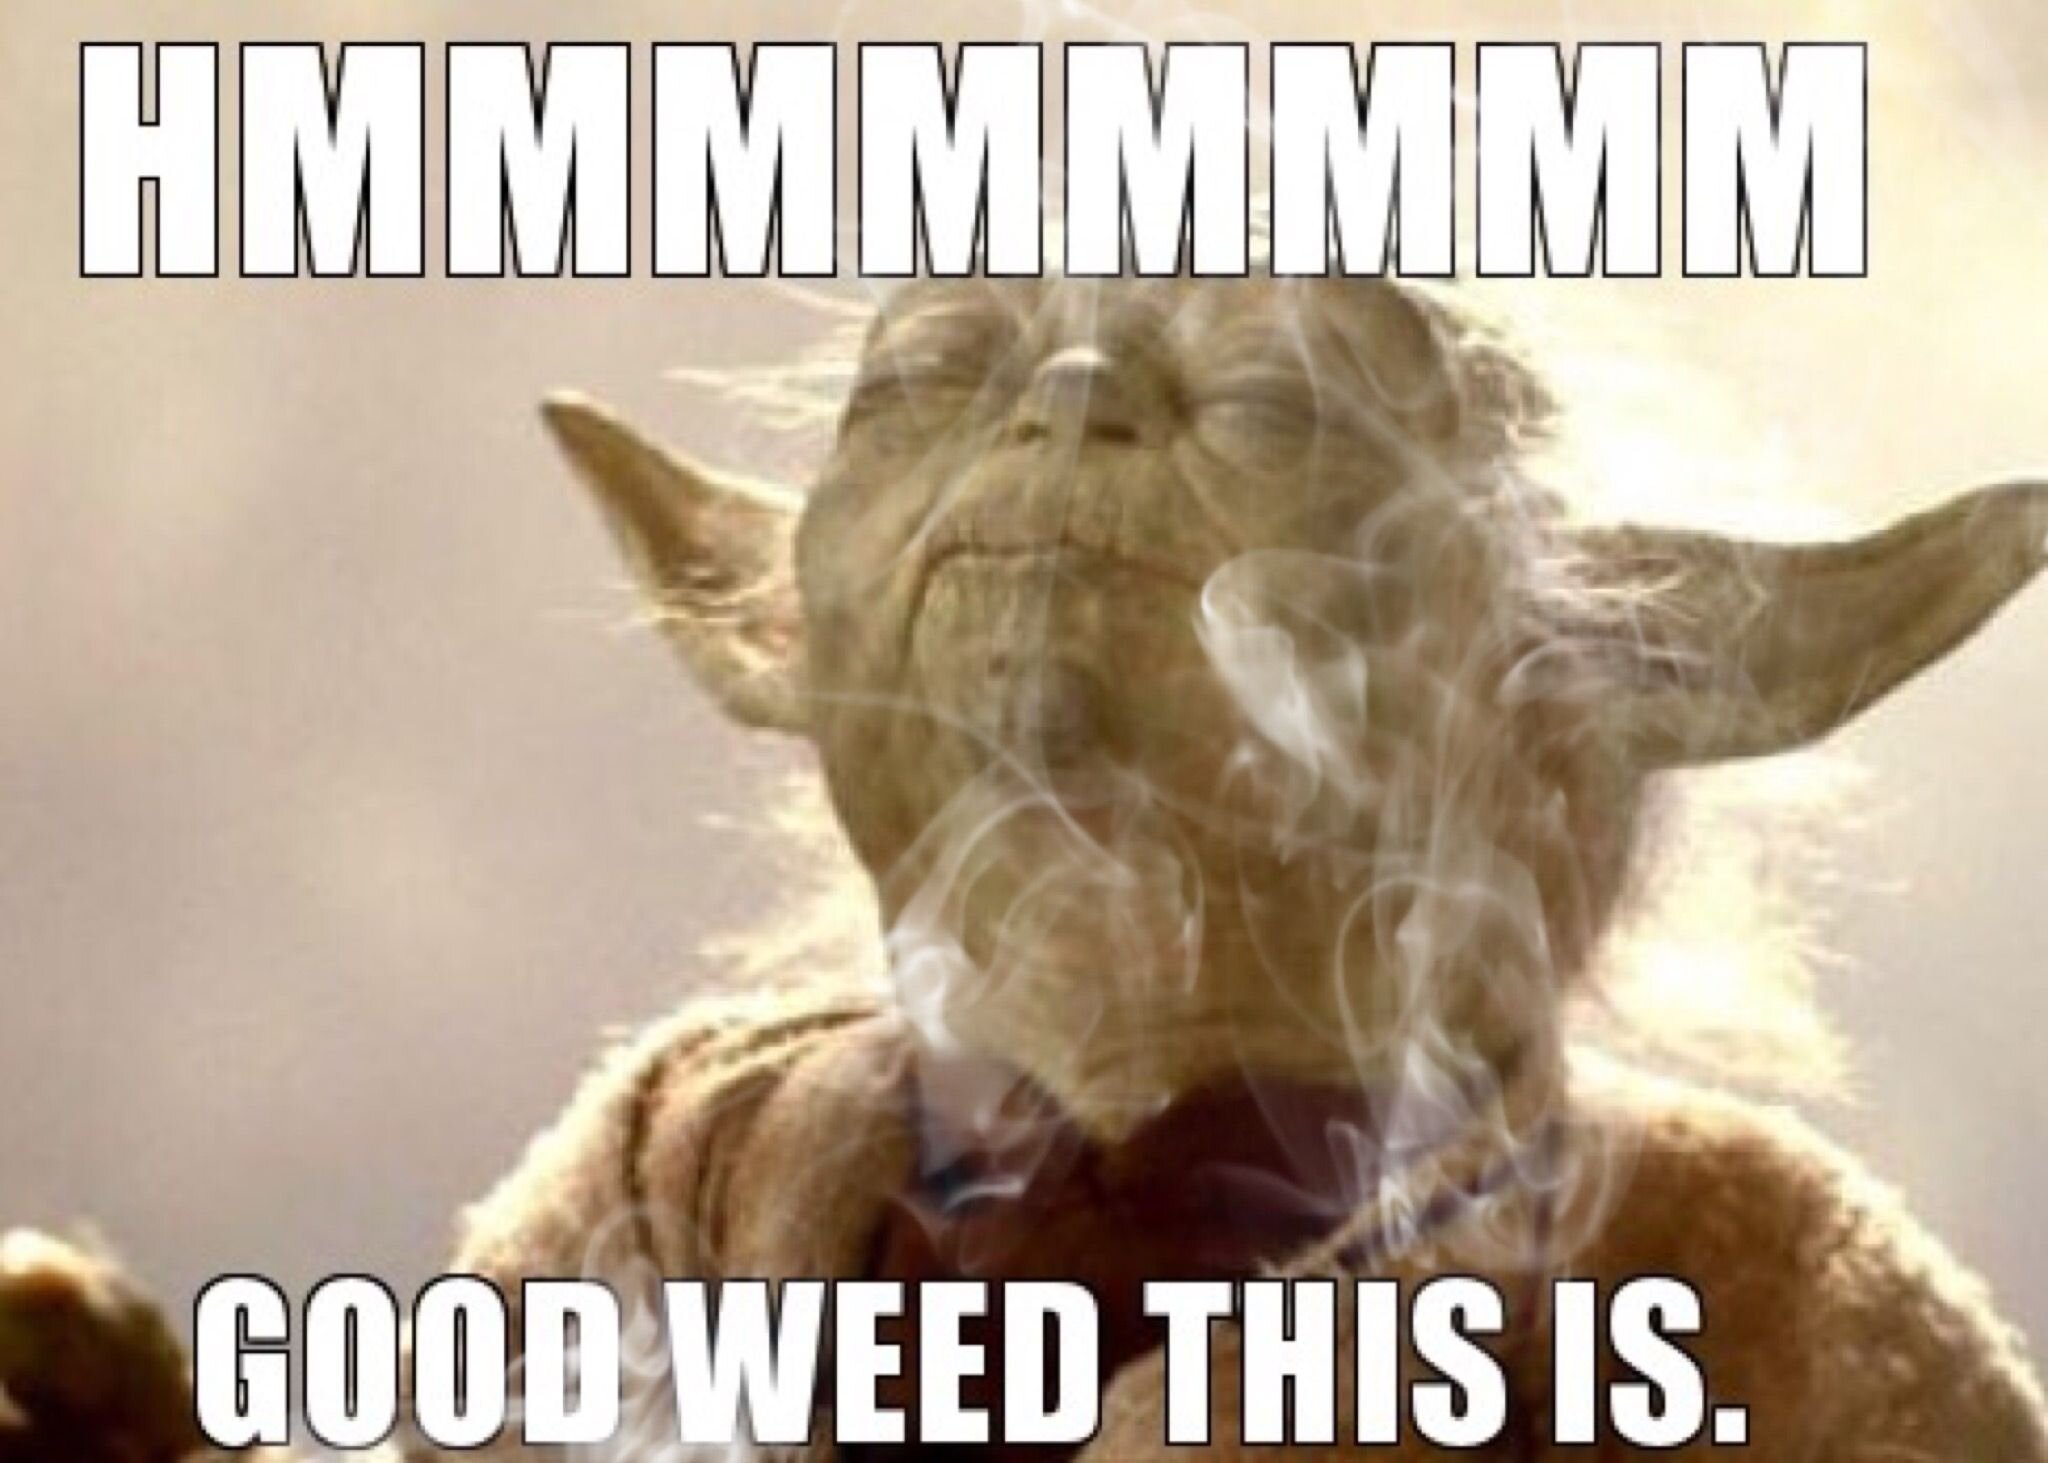 420 memes | funny 420 memes | 420 meaning | meaning of 420